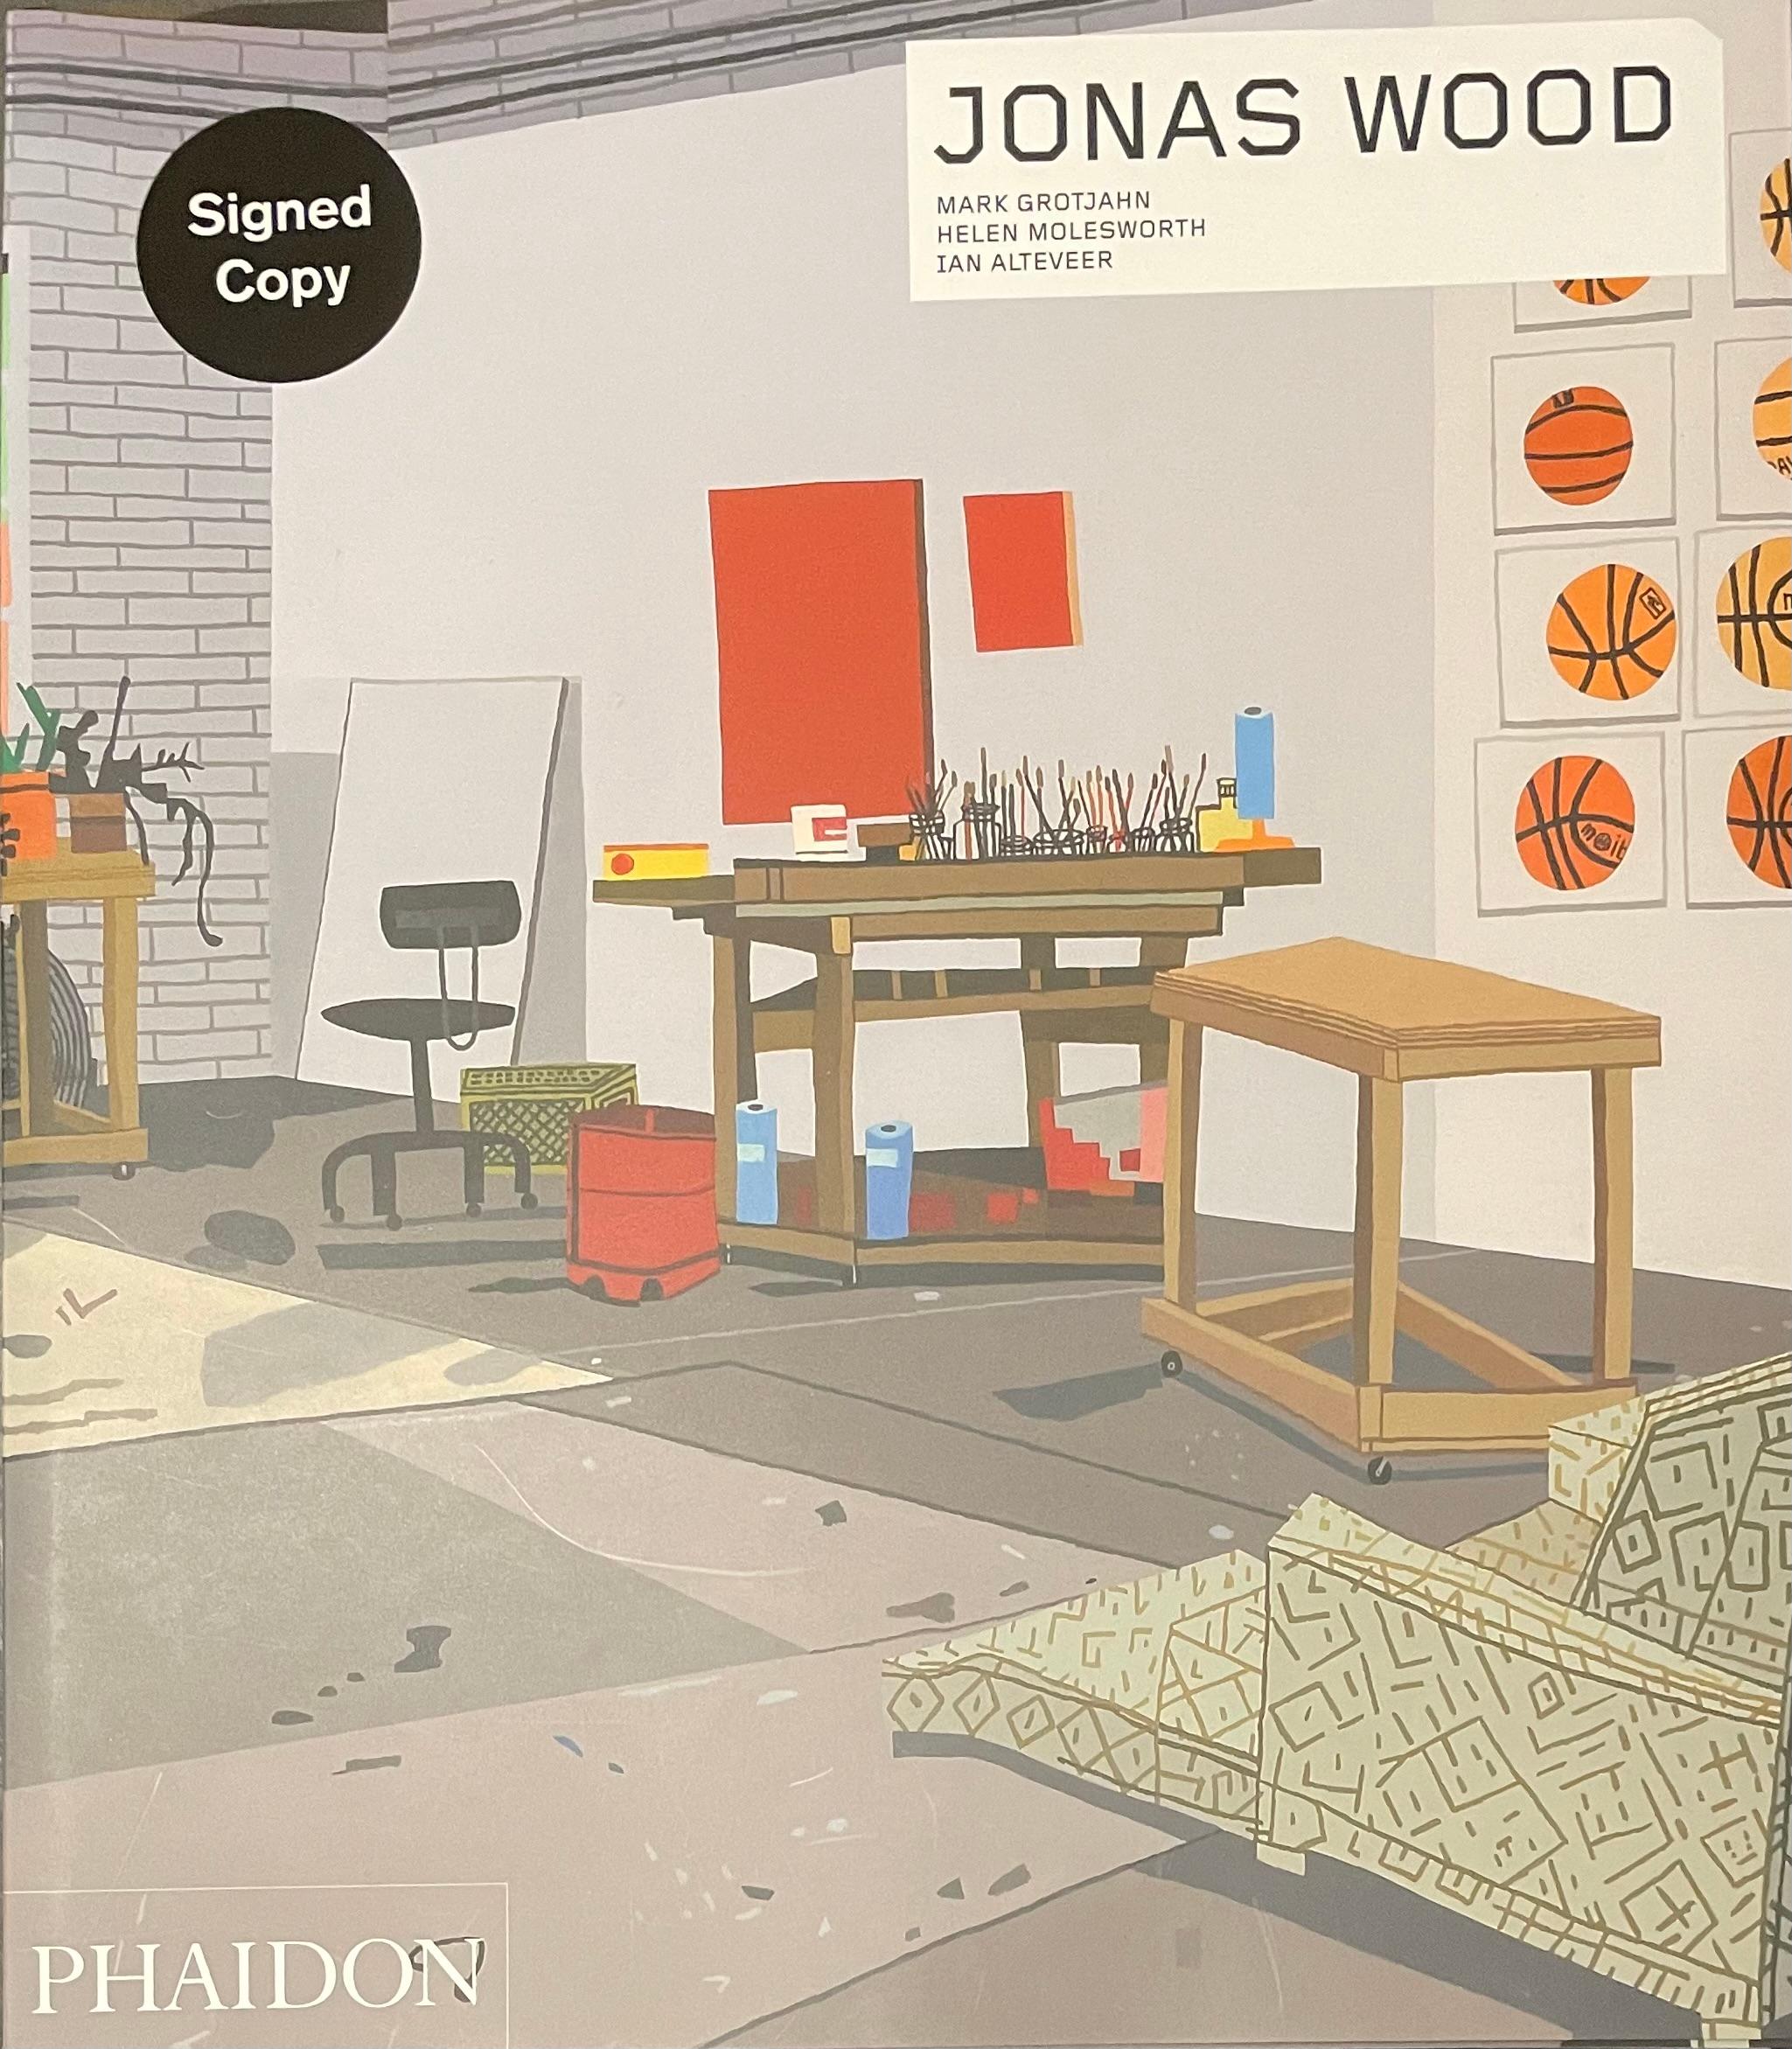 Basketballs, ceramics, and lush plants fill Jonas Wood’s paintings, drawings, and prints, which mostly comprise intricate still lifes and interior domestic scenes. Throughout his compositions, the artist draws from art history, memory, and the